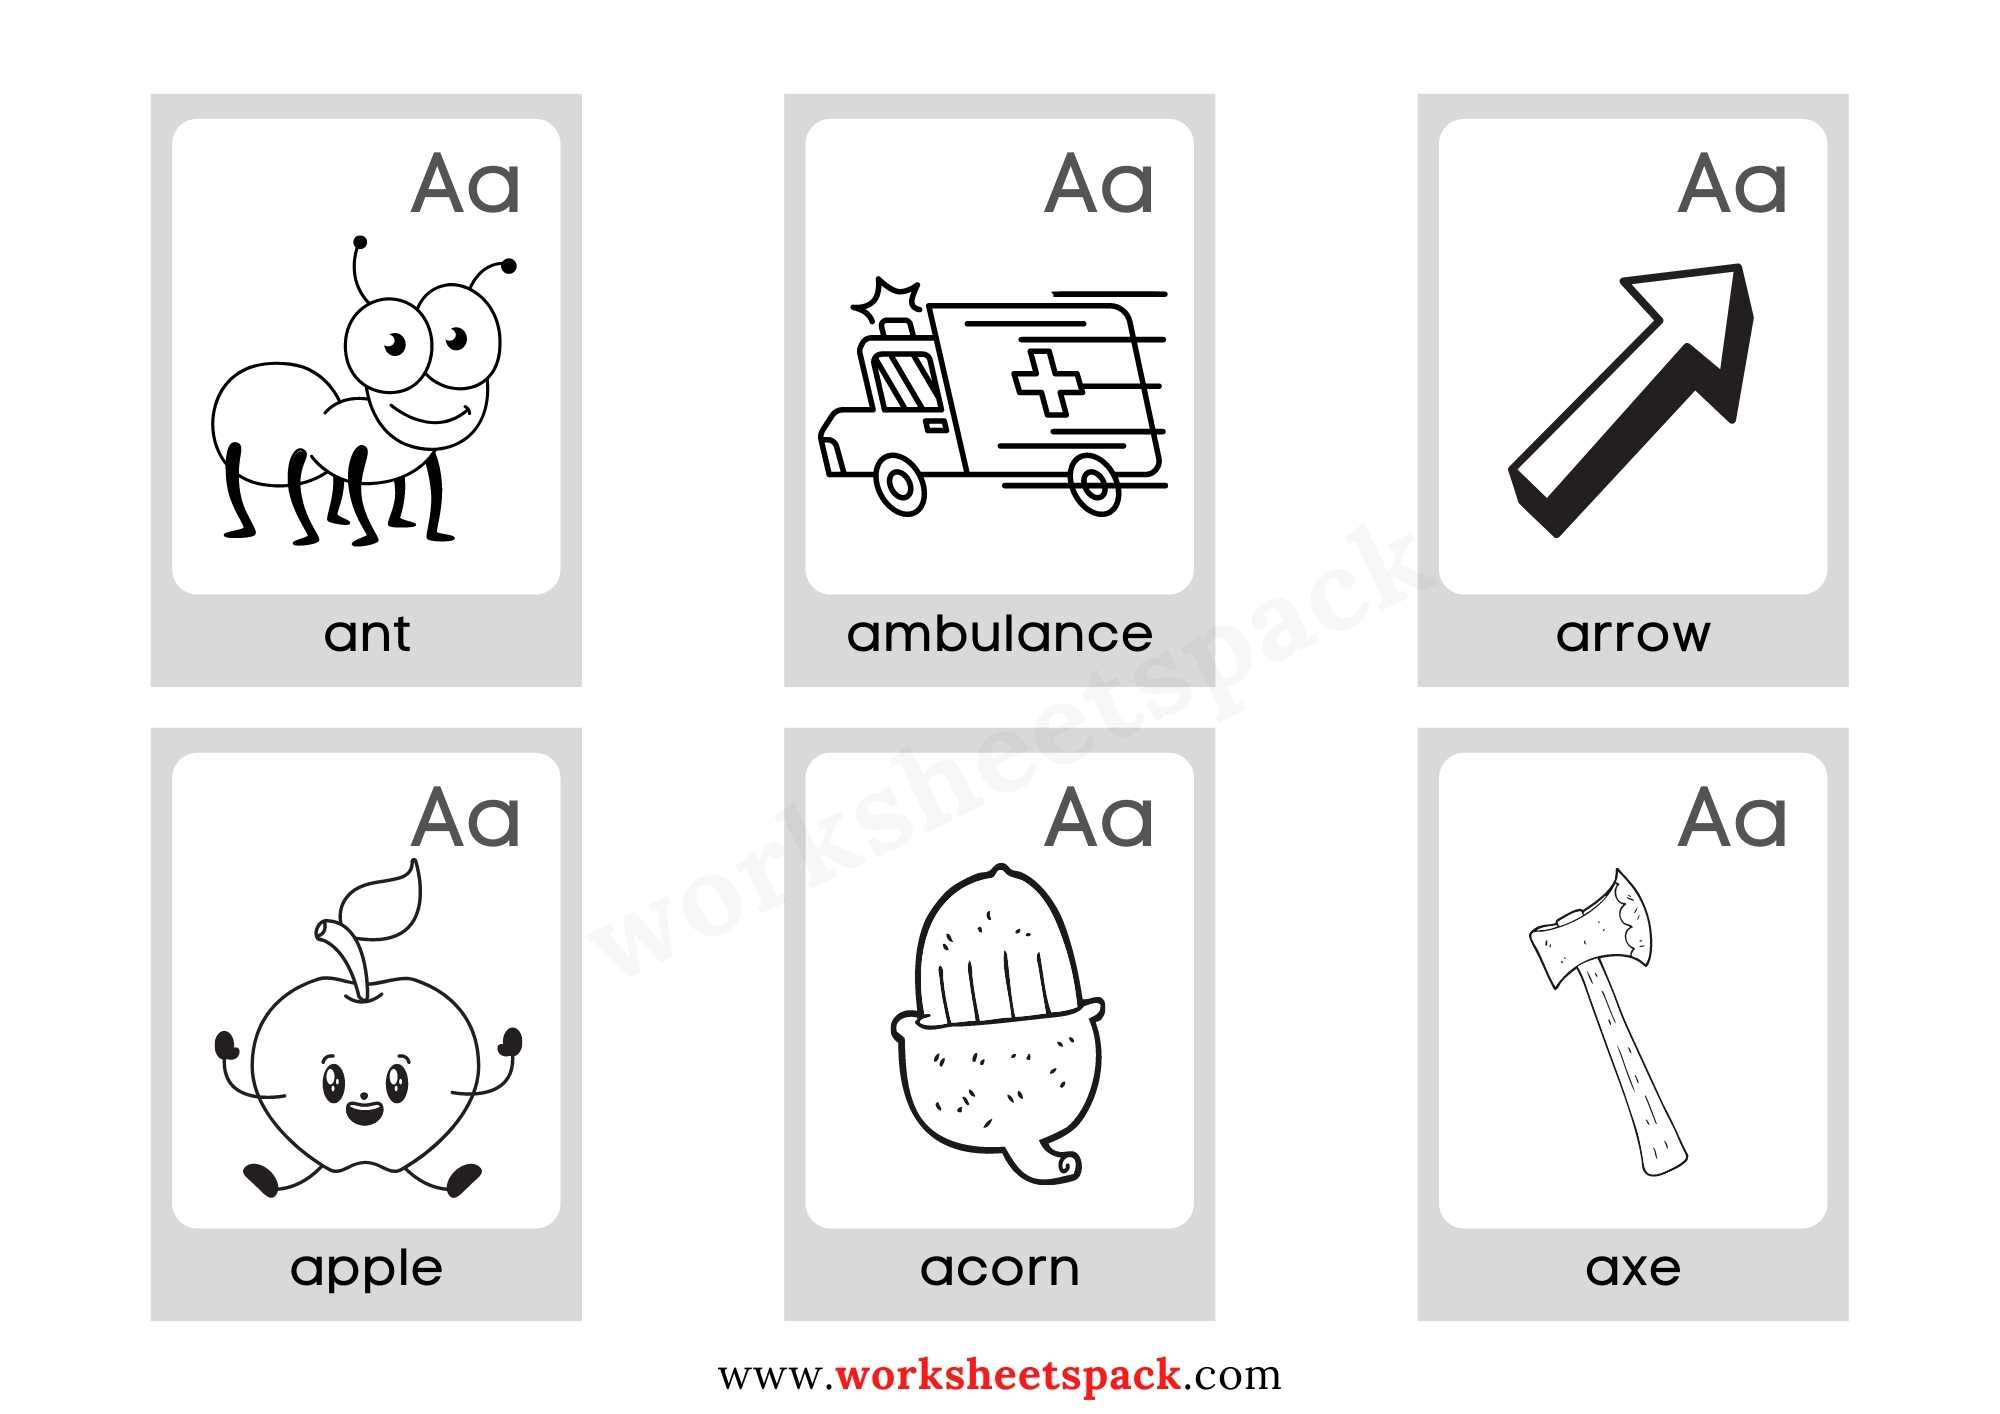 free-alphabet-book-with-pictures-worksheetspack